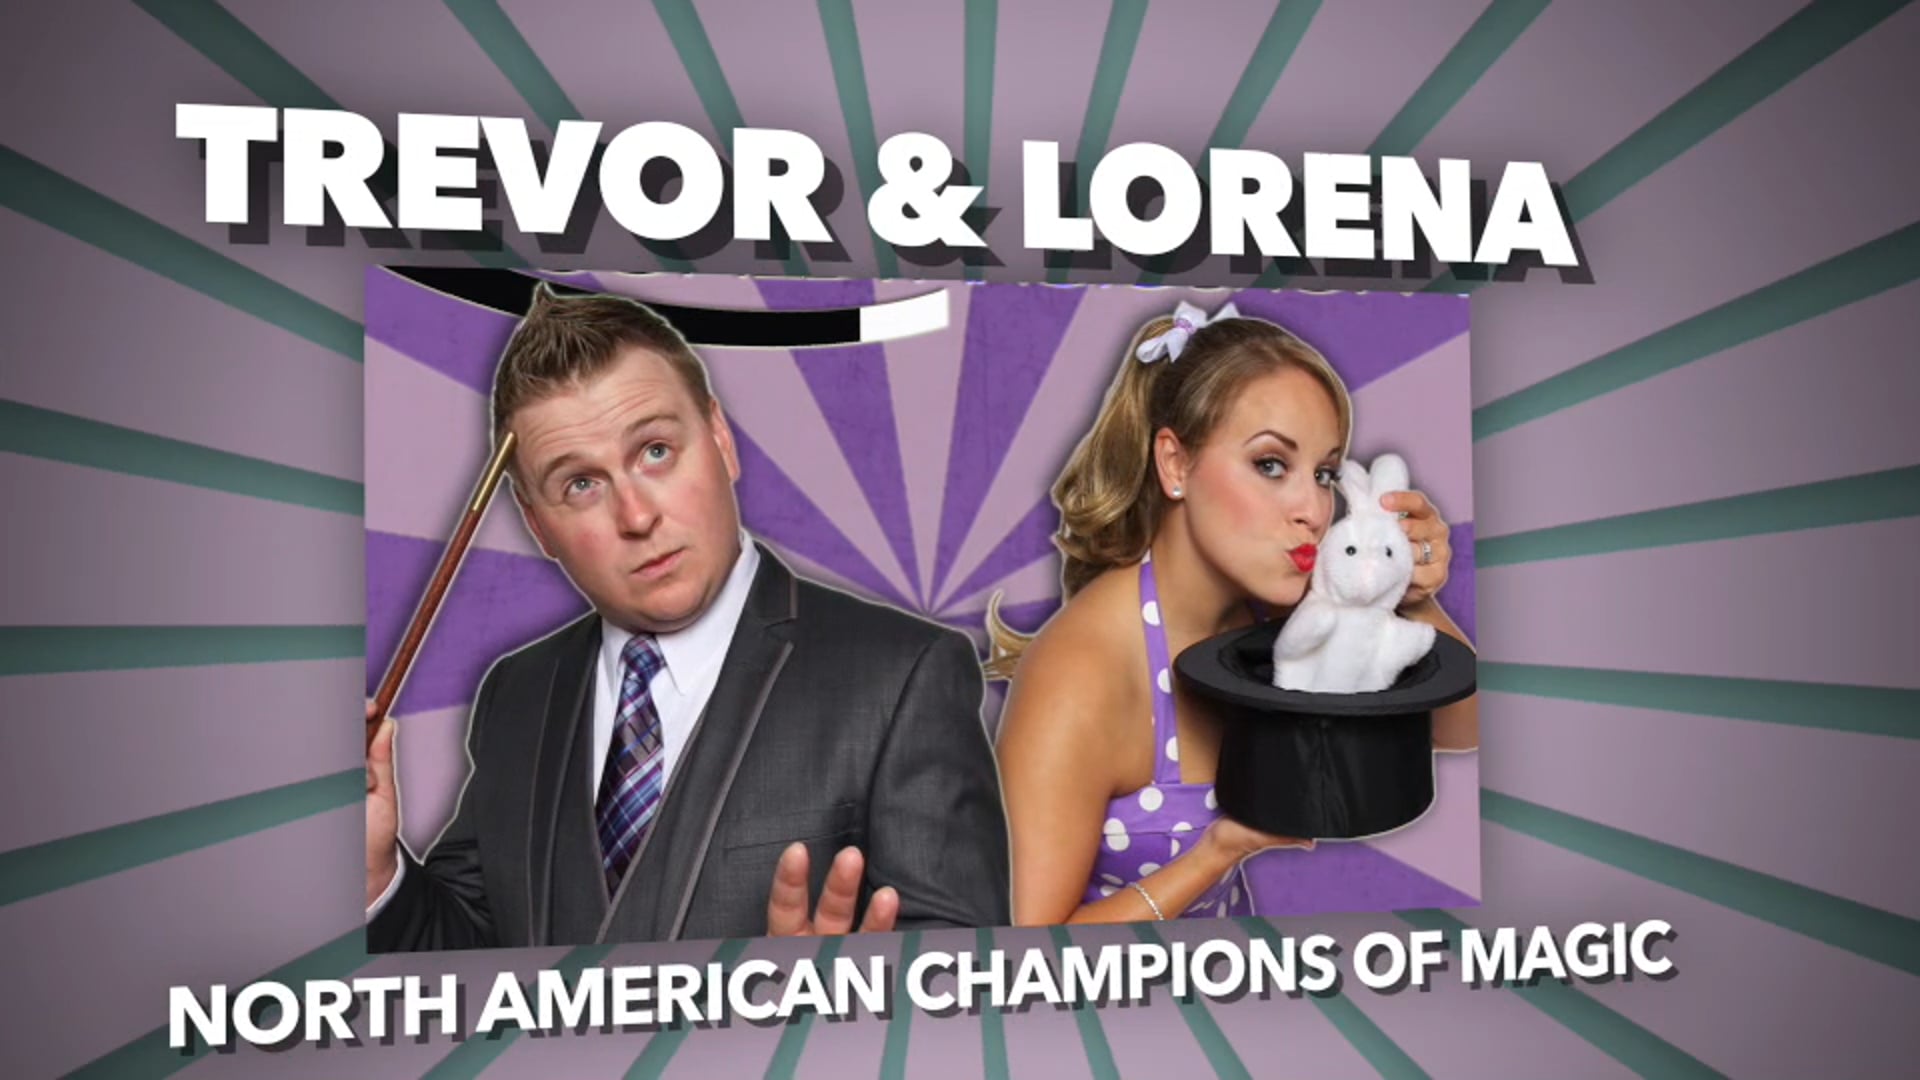 Promotional video thumbnail 1 for Trevor & Lorena Comedy Magic